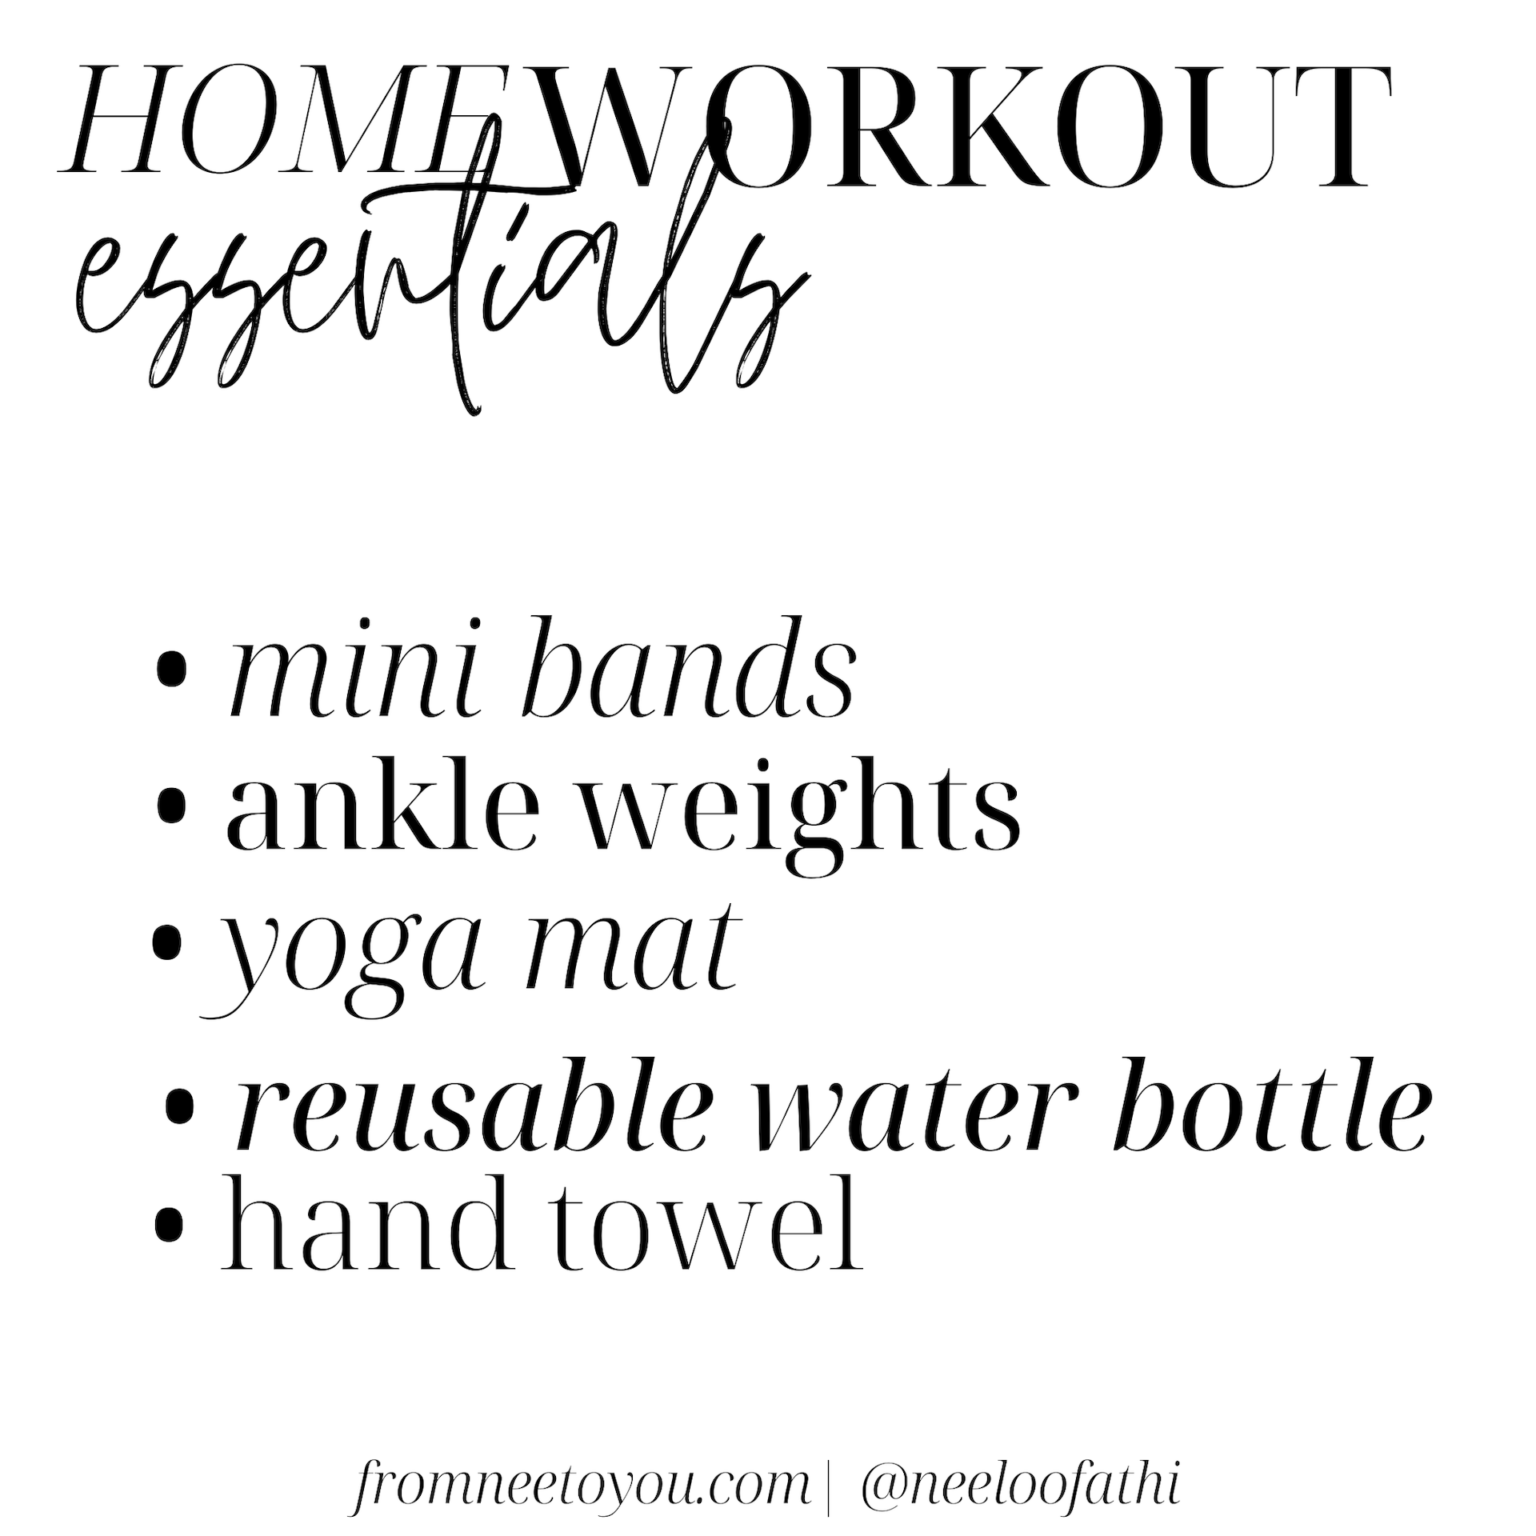 Home Workout Guide - From Nee, To You - Neeloo Fathi